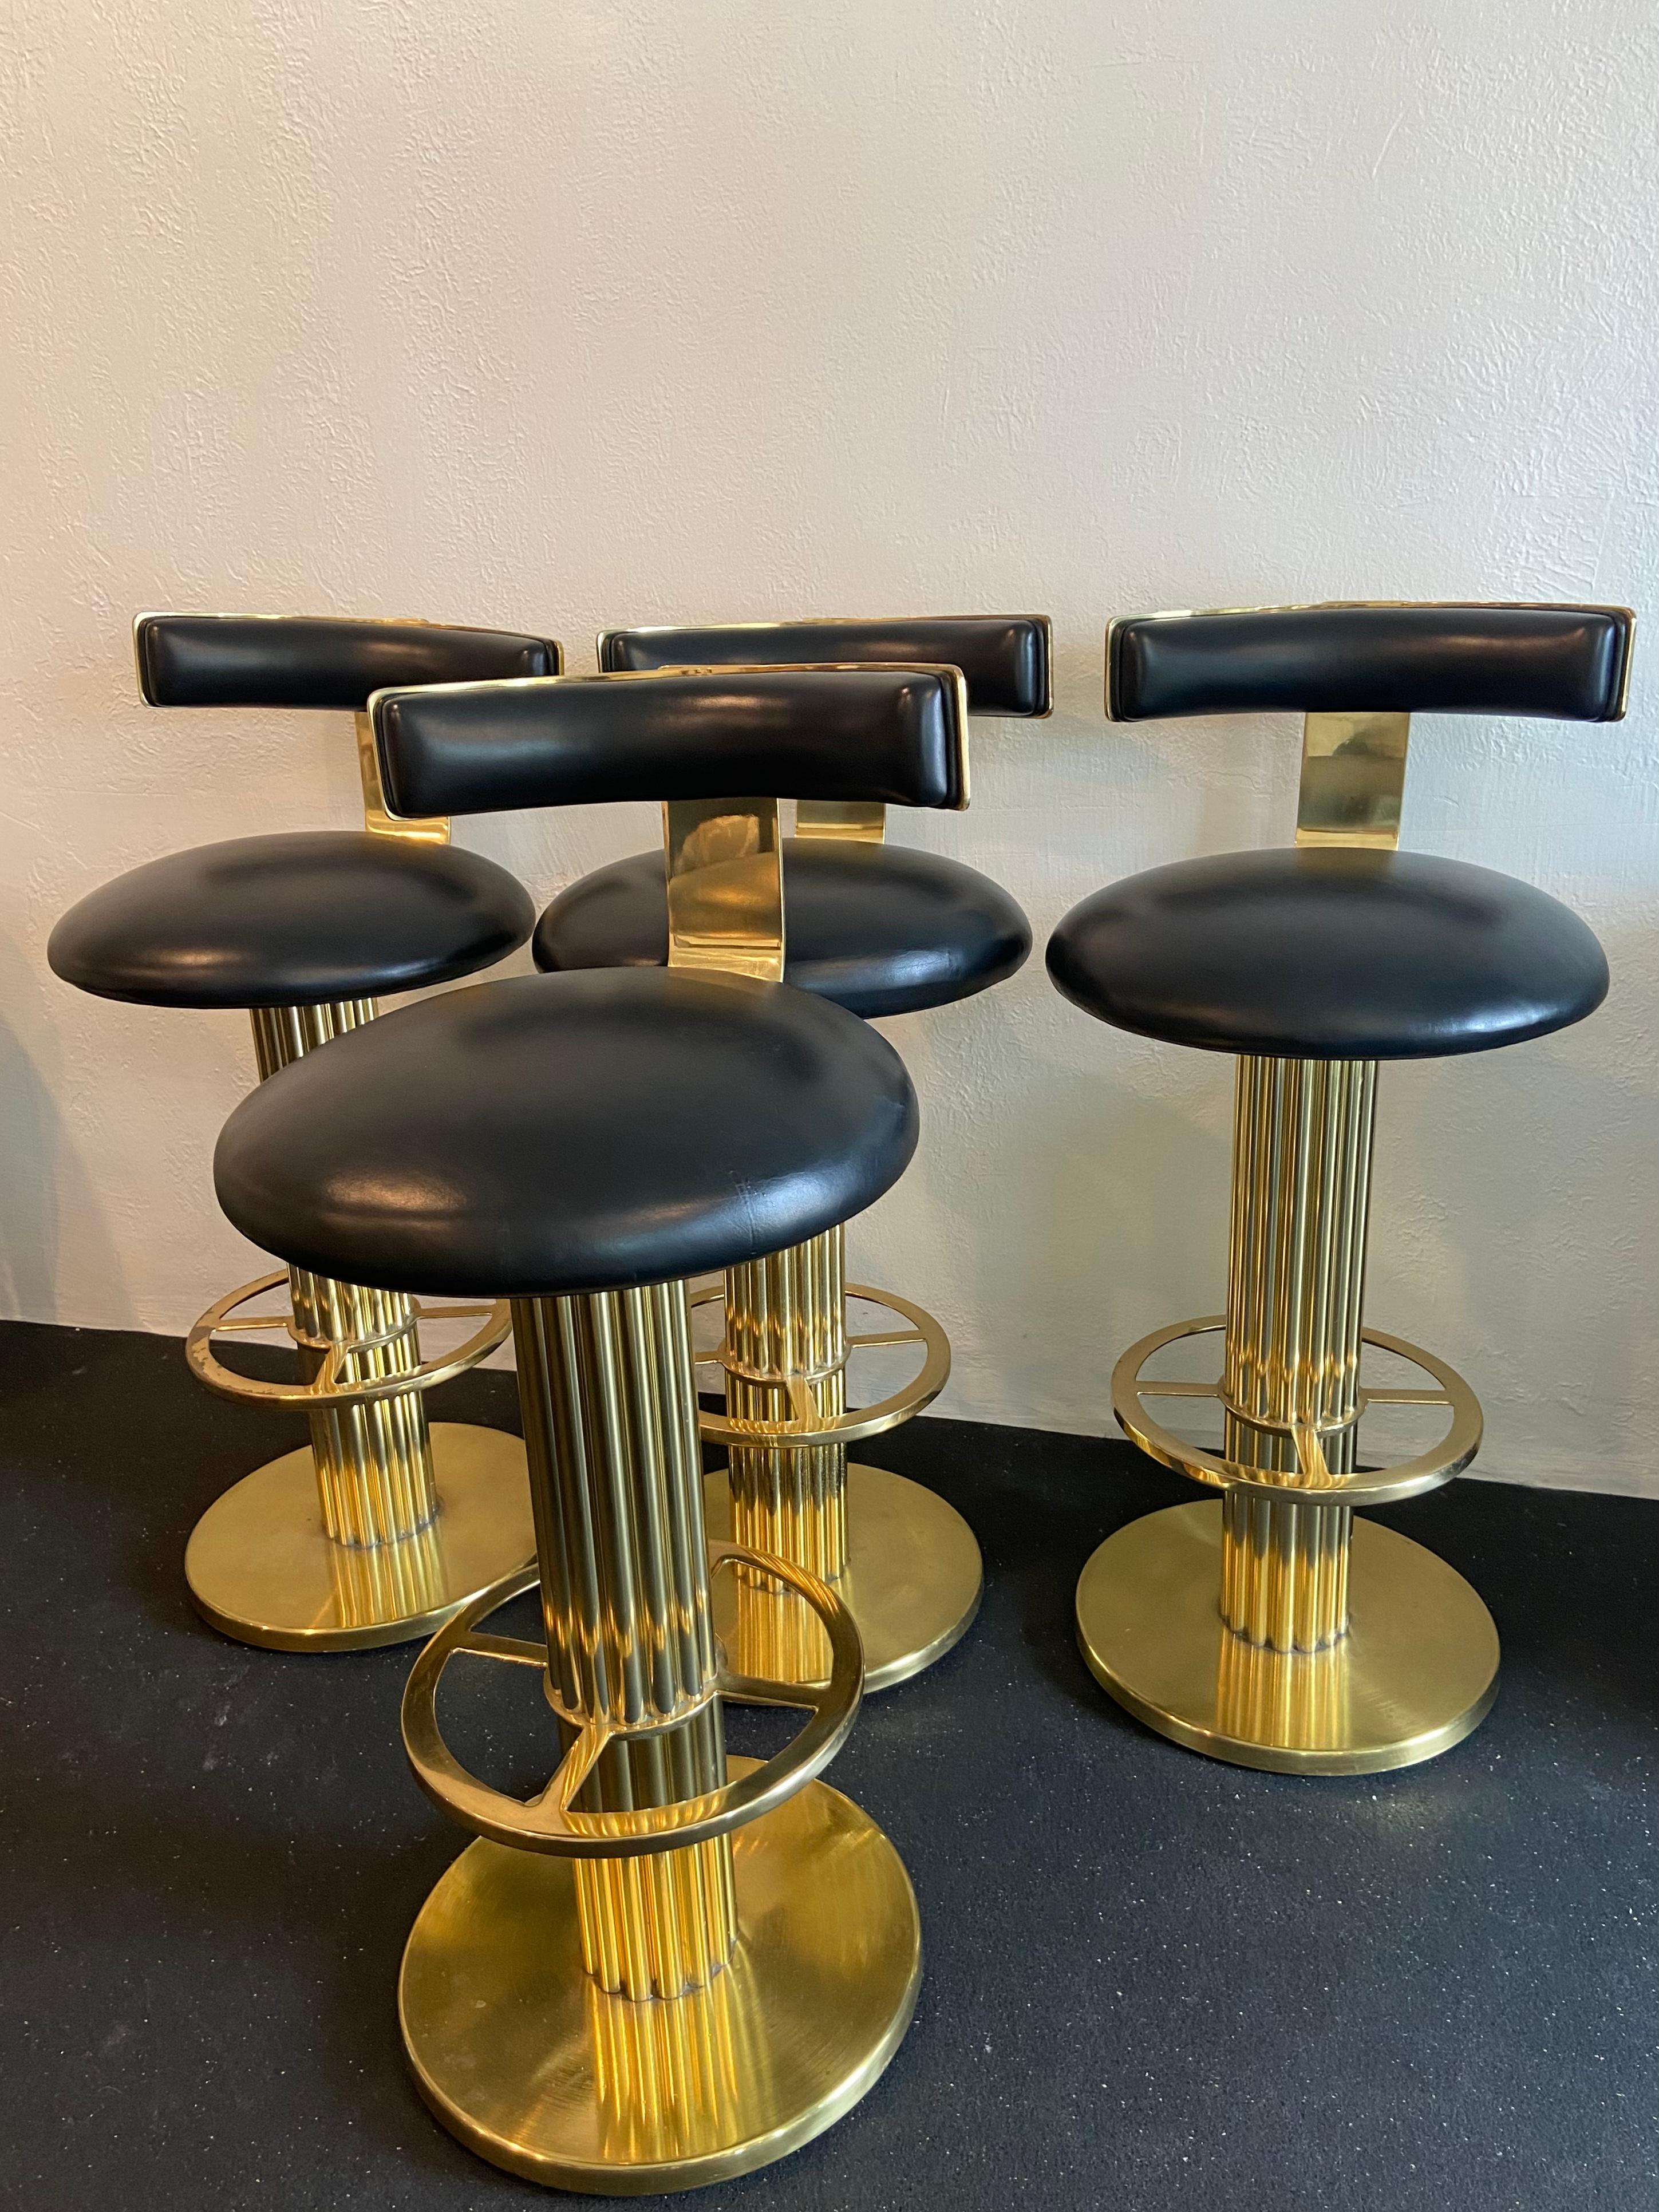 Set of 4 brass swivel barstools by Design For Leisure. The stools retain the original leather upholstery, which does show some signs of wear however remains intact with no rips or tears. The clear coat has worn in some areas which has led to some